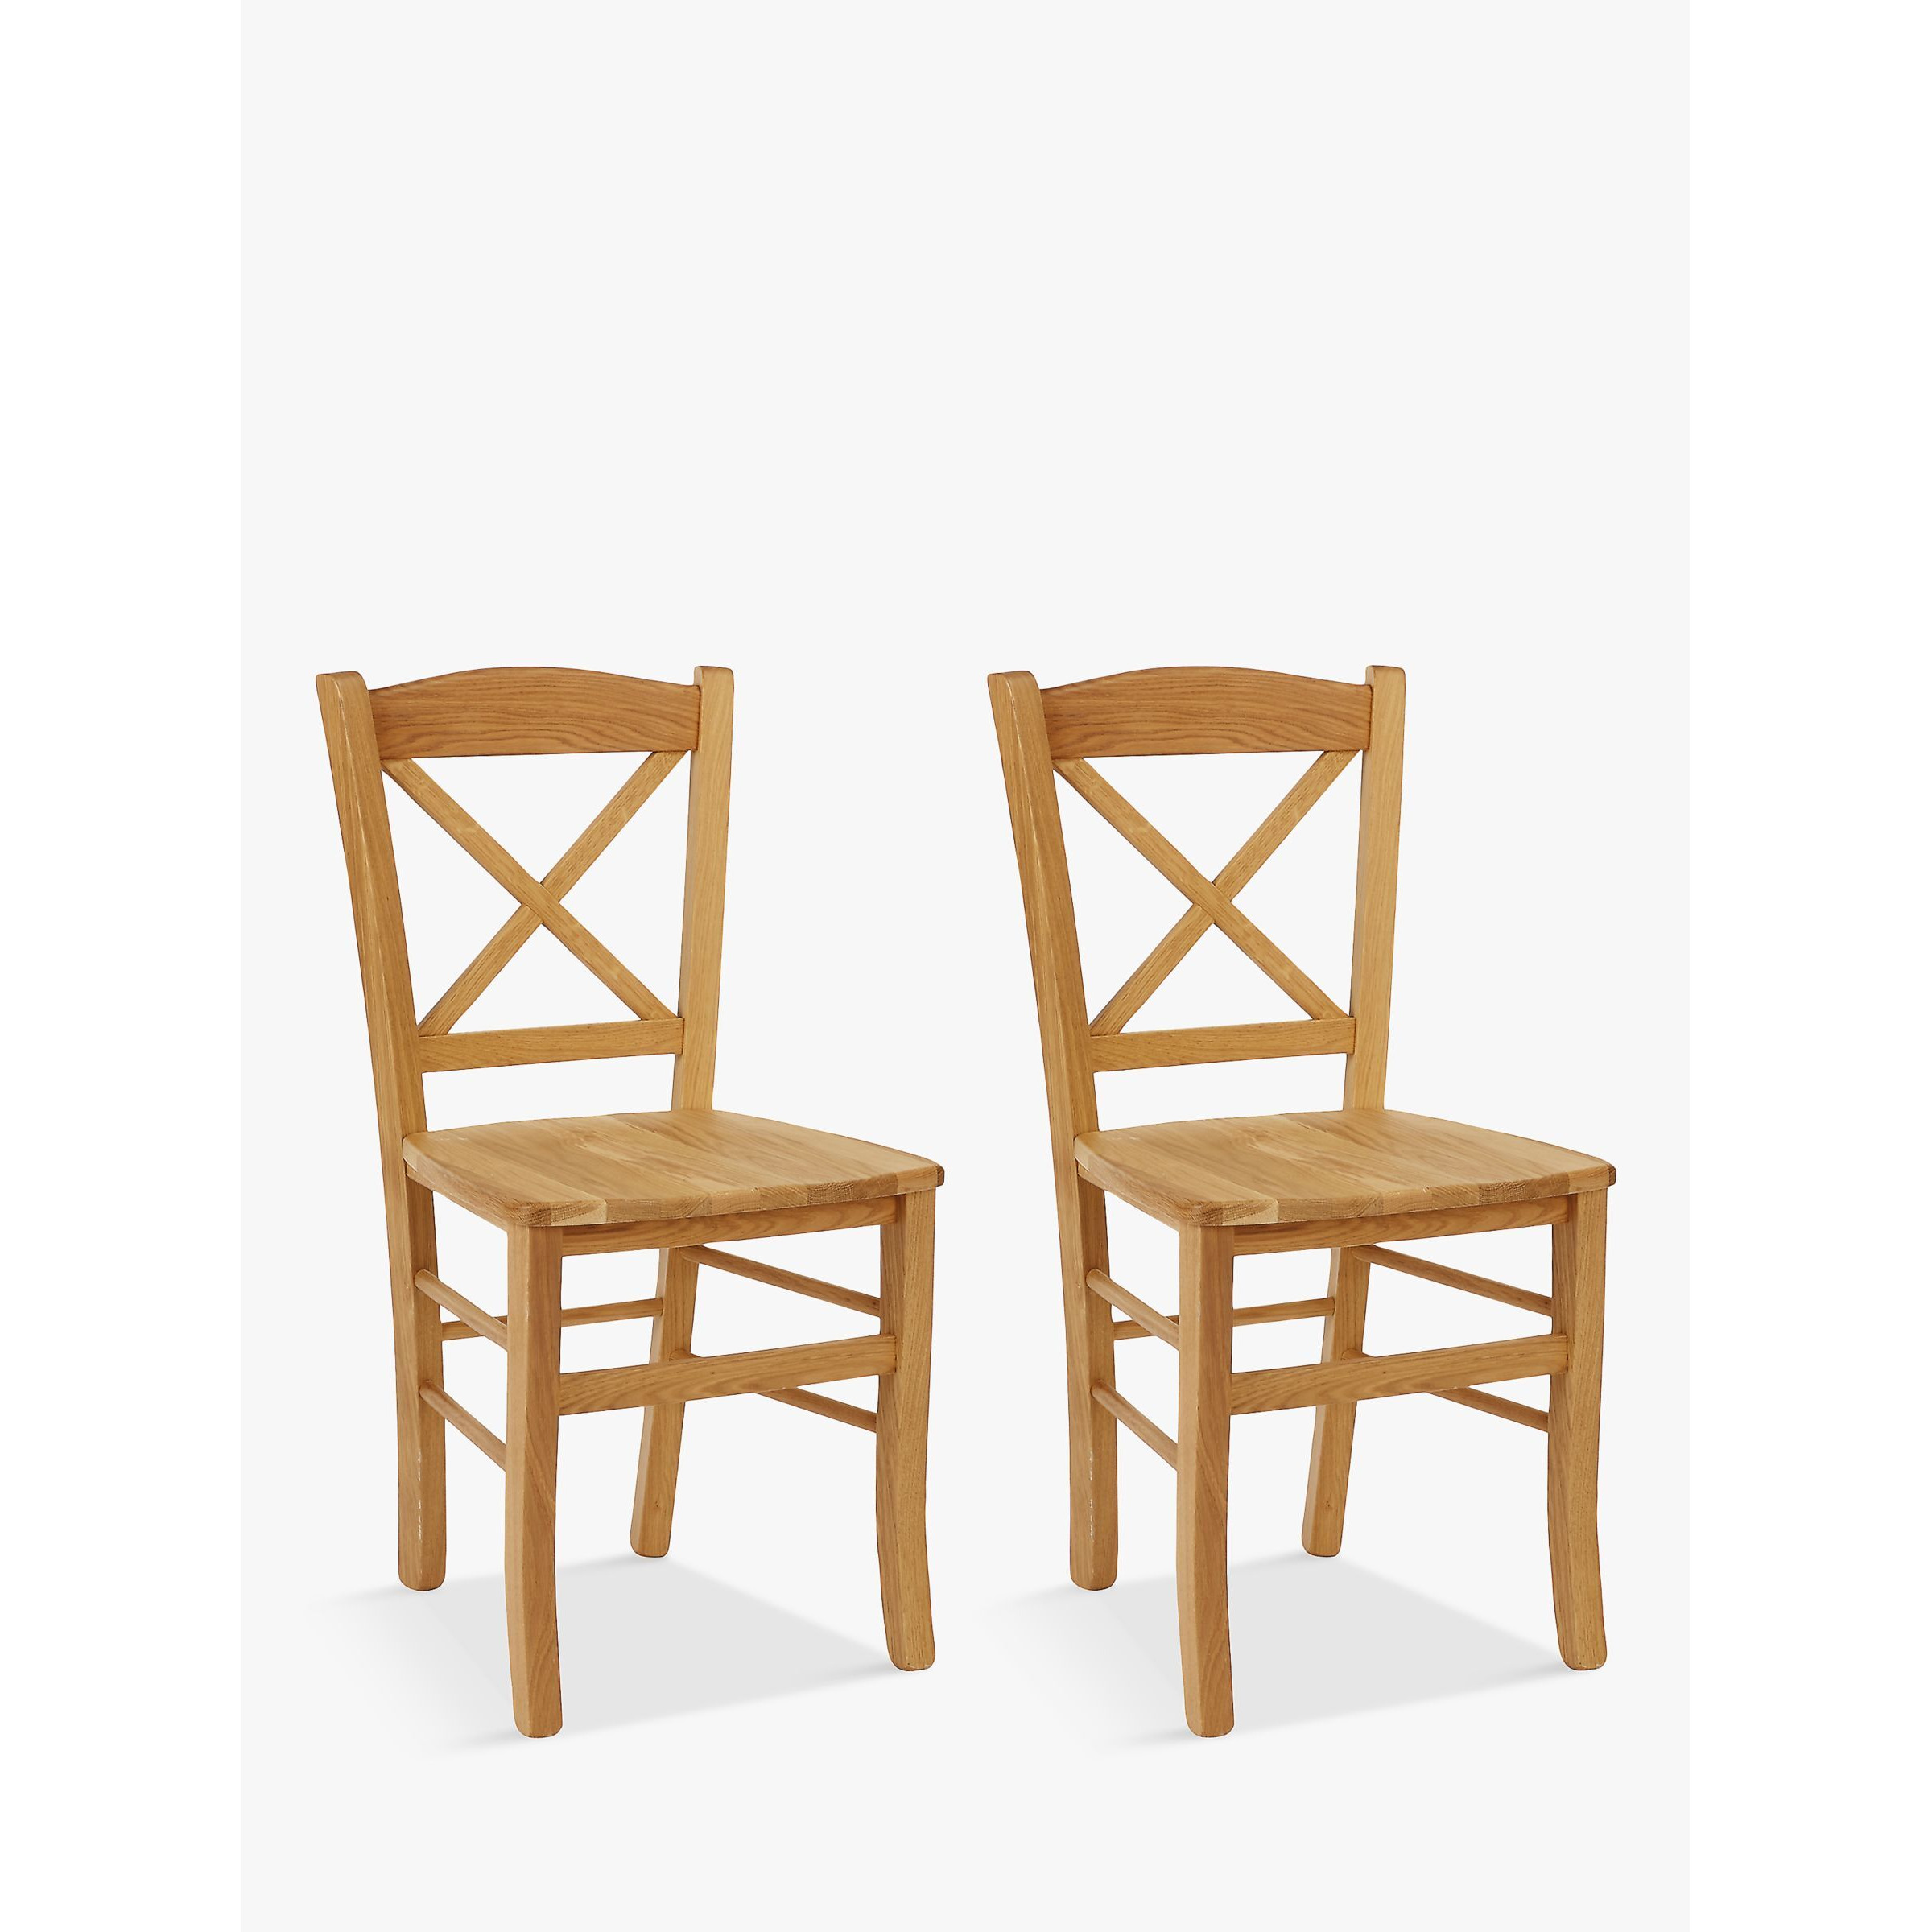 John Lewis ANYDAY Clayton Beech Wood Dining Chairs, Set of 2 - image 1